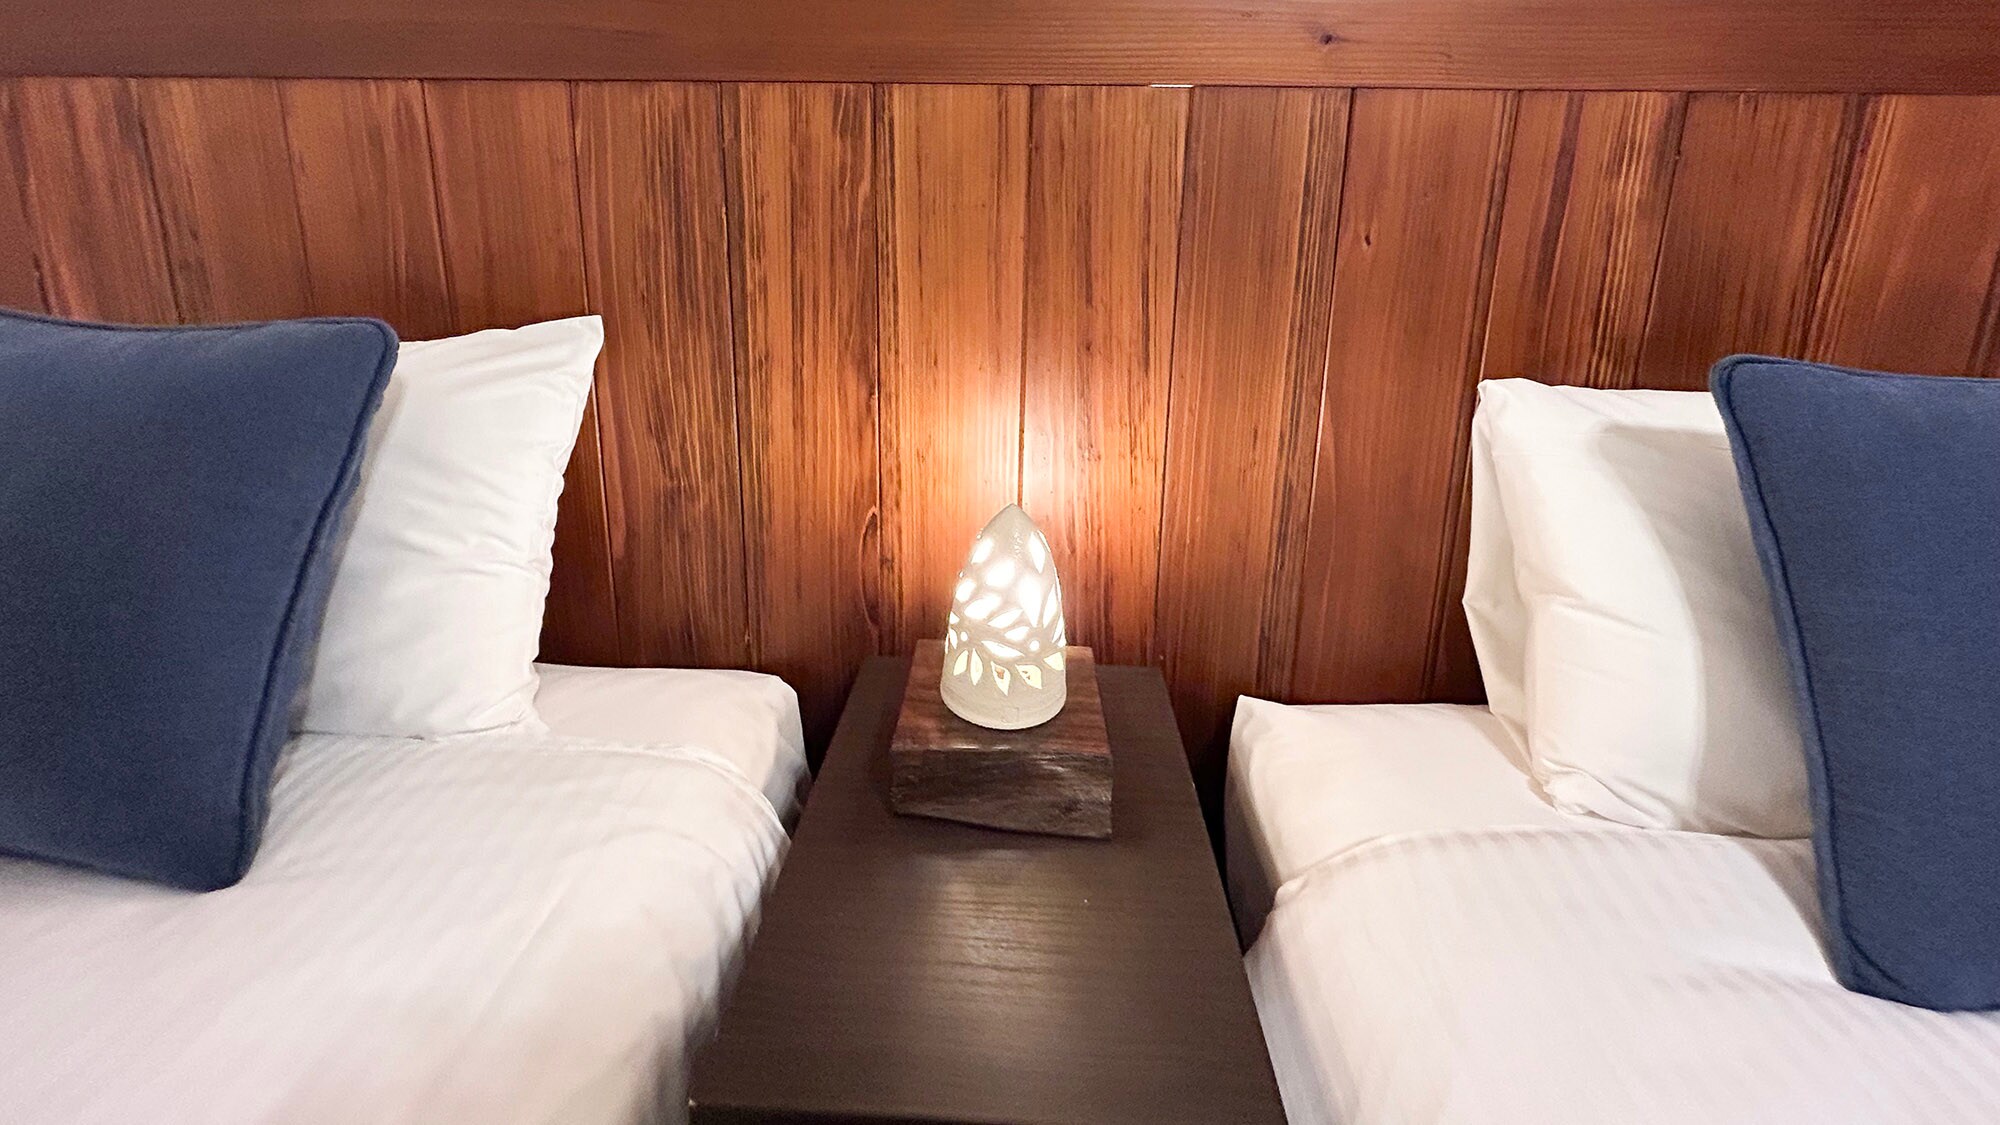 ・[Triple room] Cute lamp by the bed